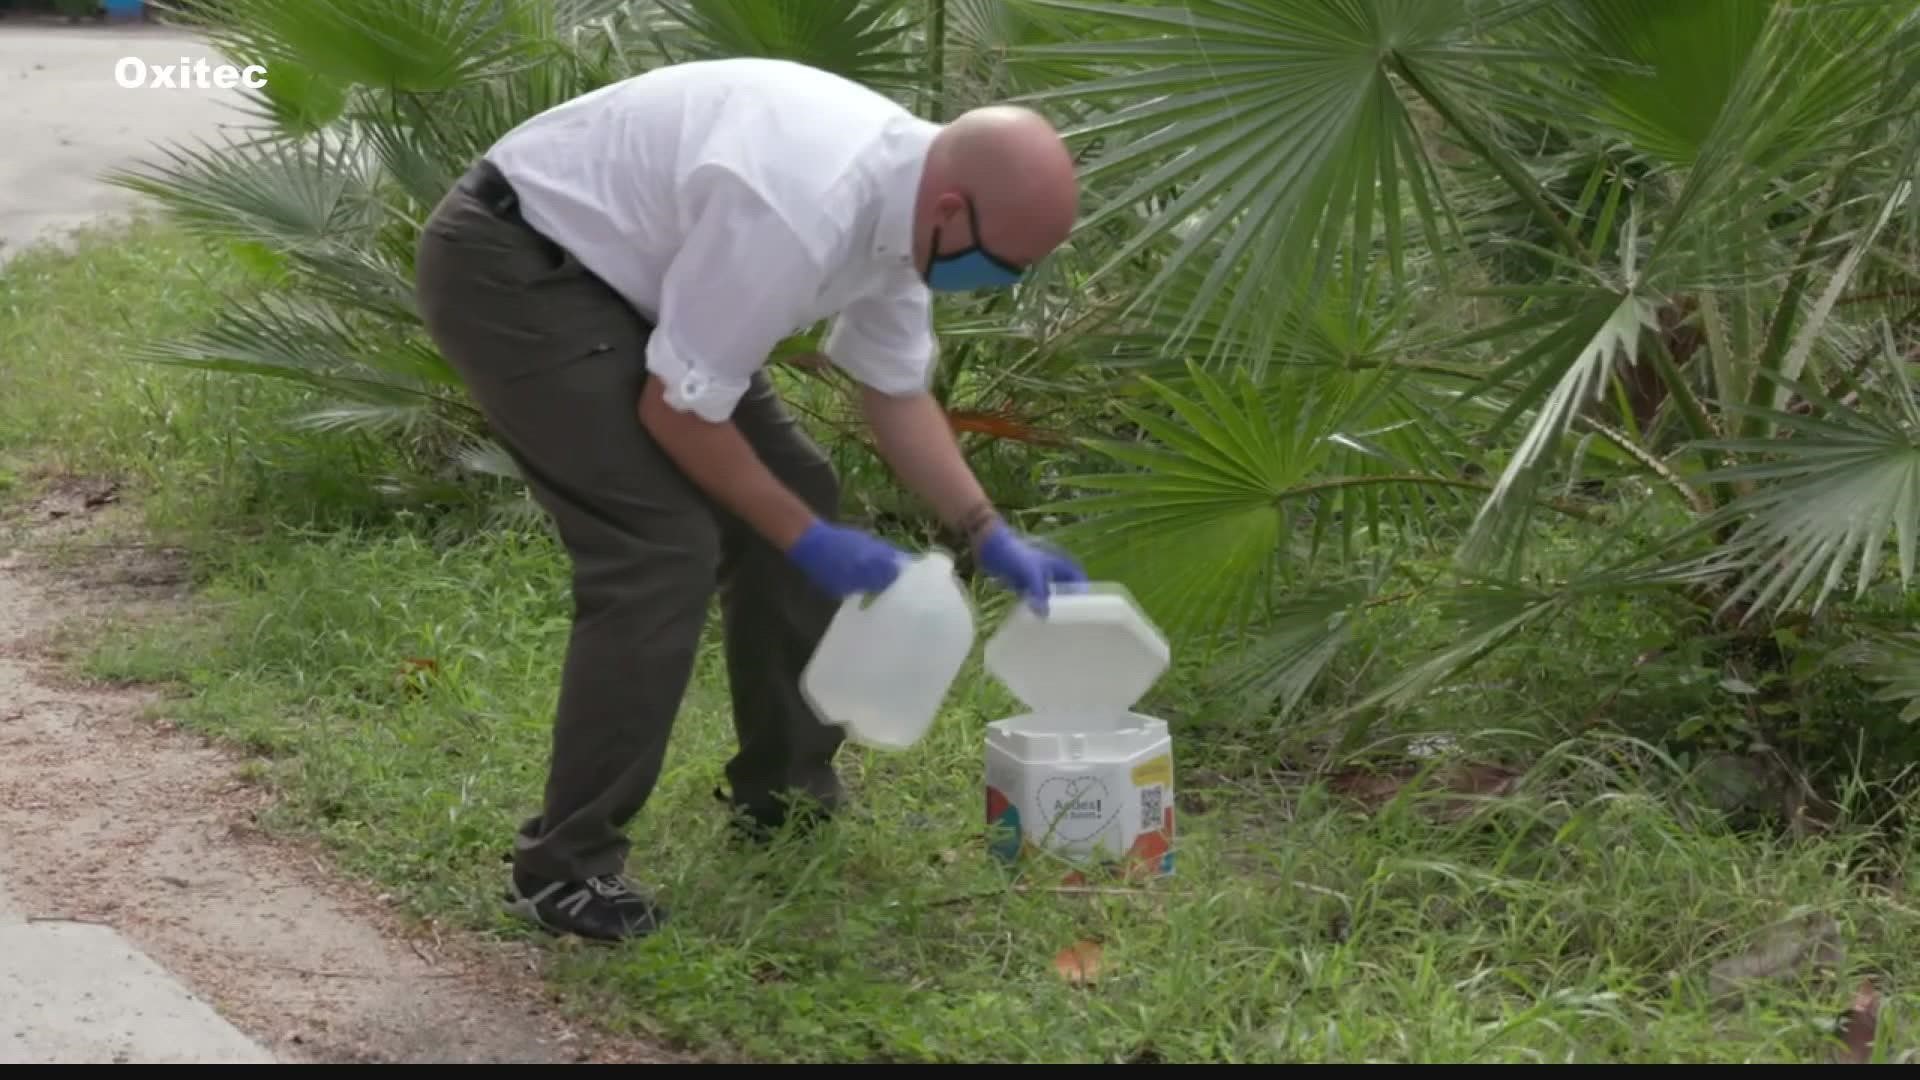 The Florida Department of Agriculture has approved the release of millions of genetically modified mosquitoes in the Florida Keys as part of a pilot program.